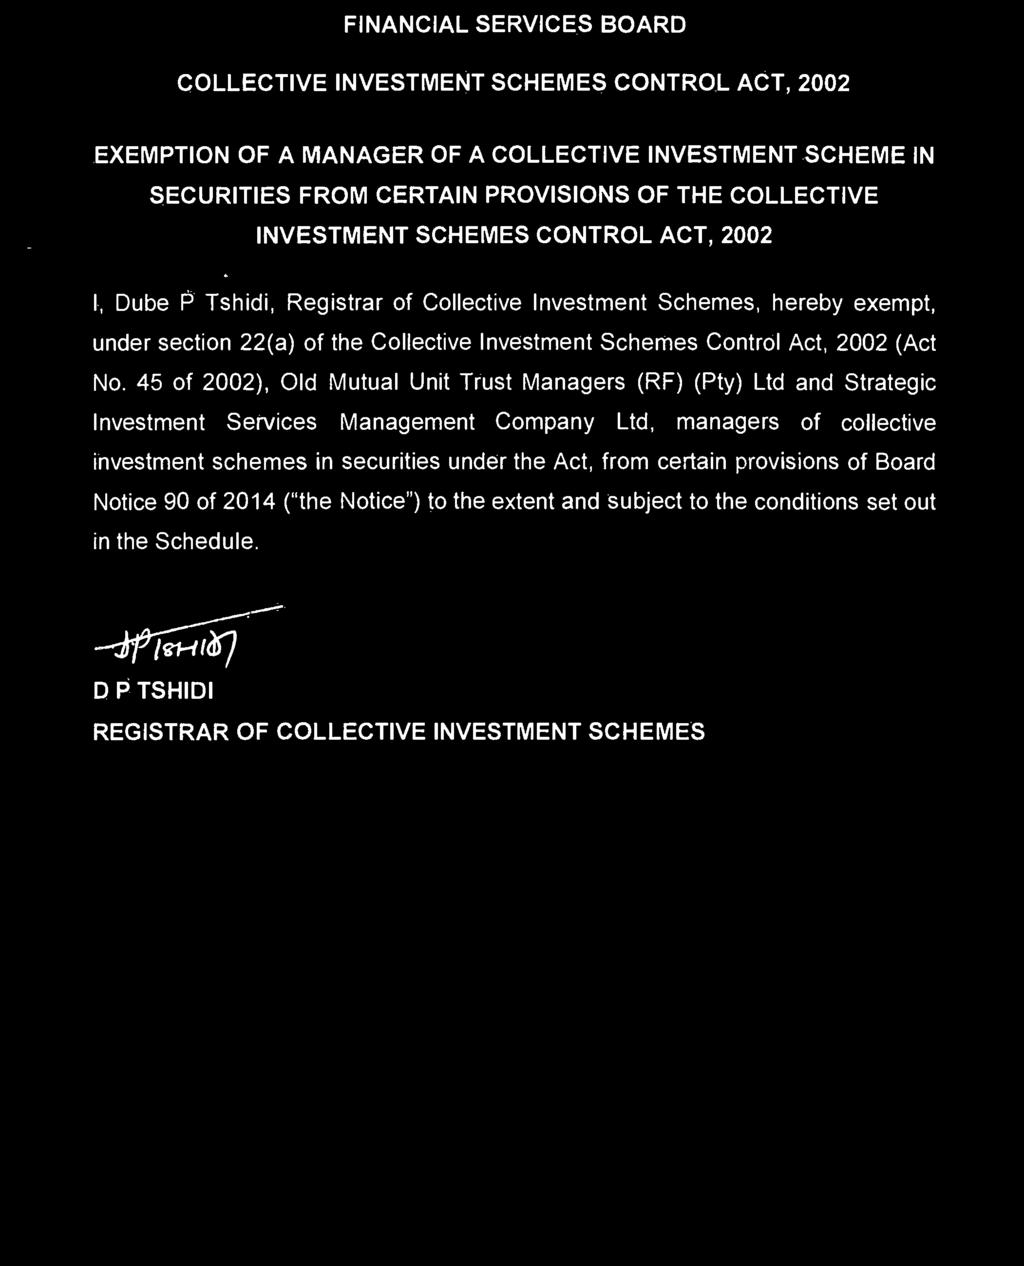 SECURITIES FROM CERTAIN PROVISIONS OF THE COLLECTIVE INVESTMENT SCHEMES CONTROL ACT, 2002 I, Dube P Tshidi, Registrar of Collective Investment Schemes, hereby exempt, under section 22(a) of the